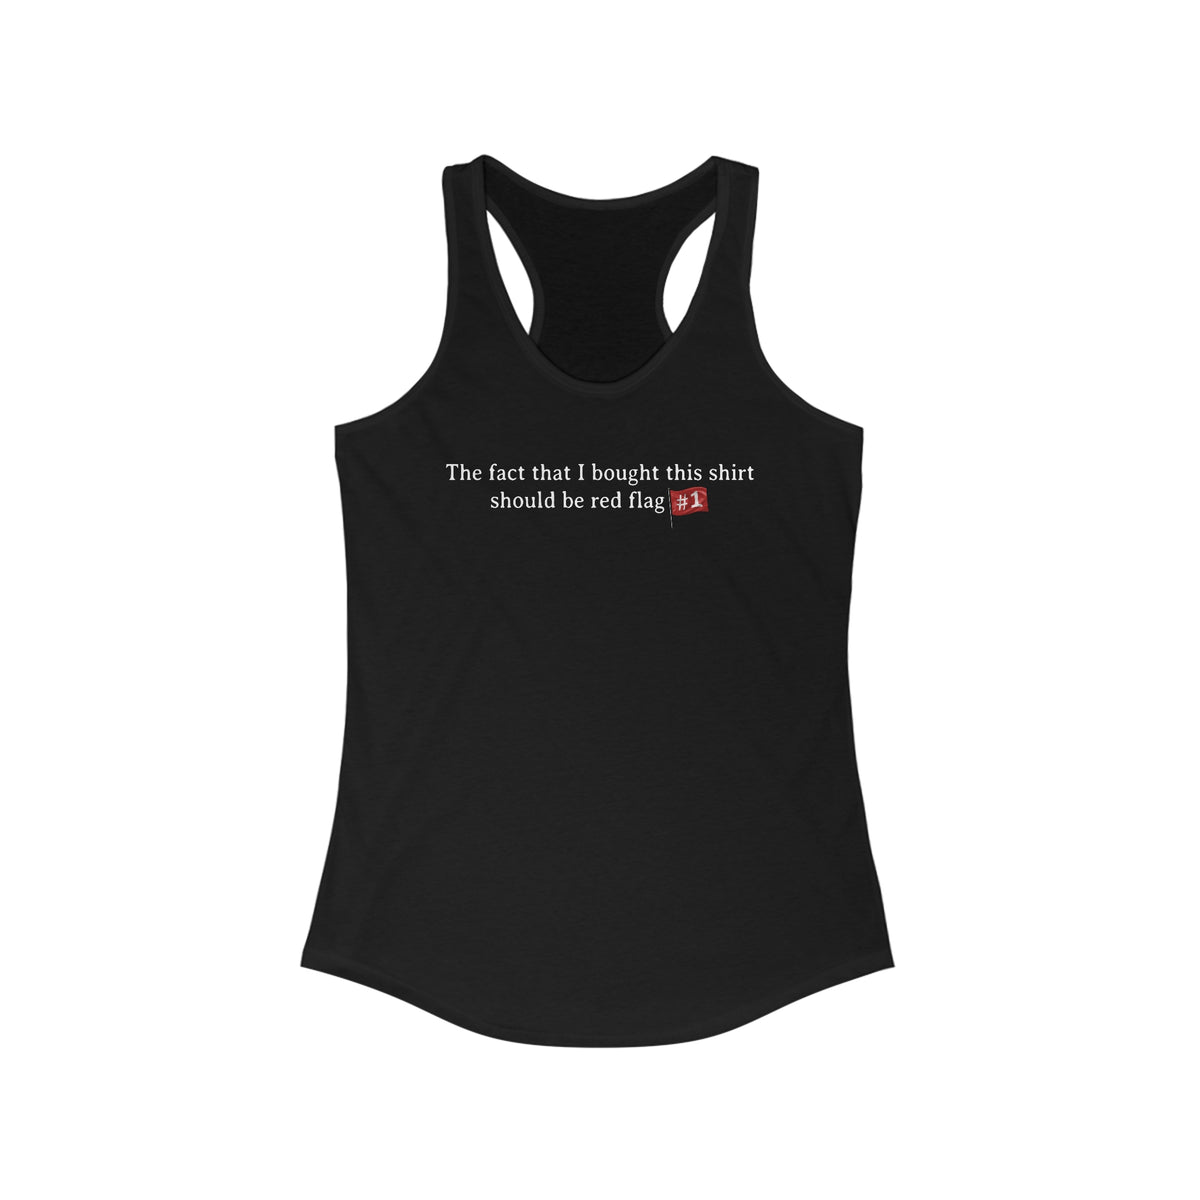 The Fact That I Bought This Shirt Should Be Red Flag #1 - Women’s Racerback Tank